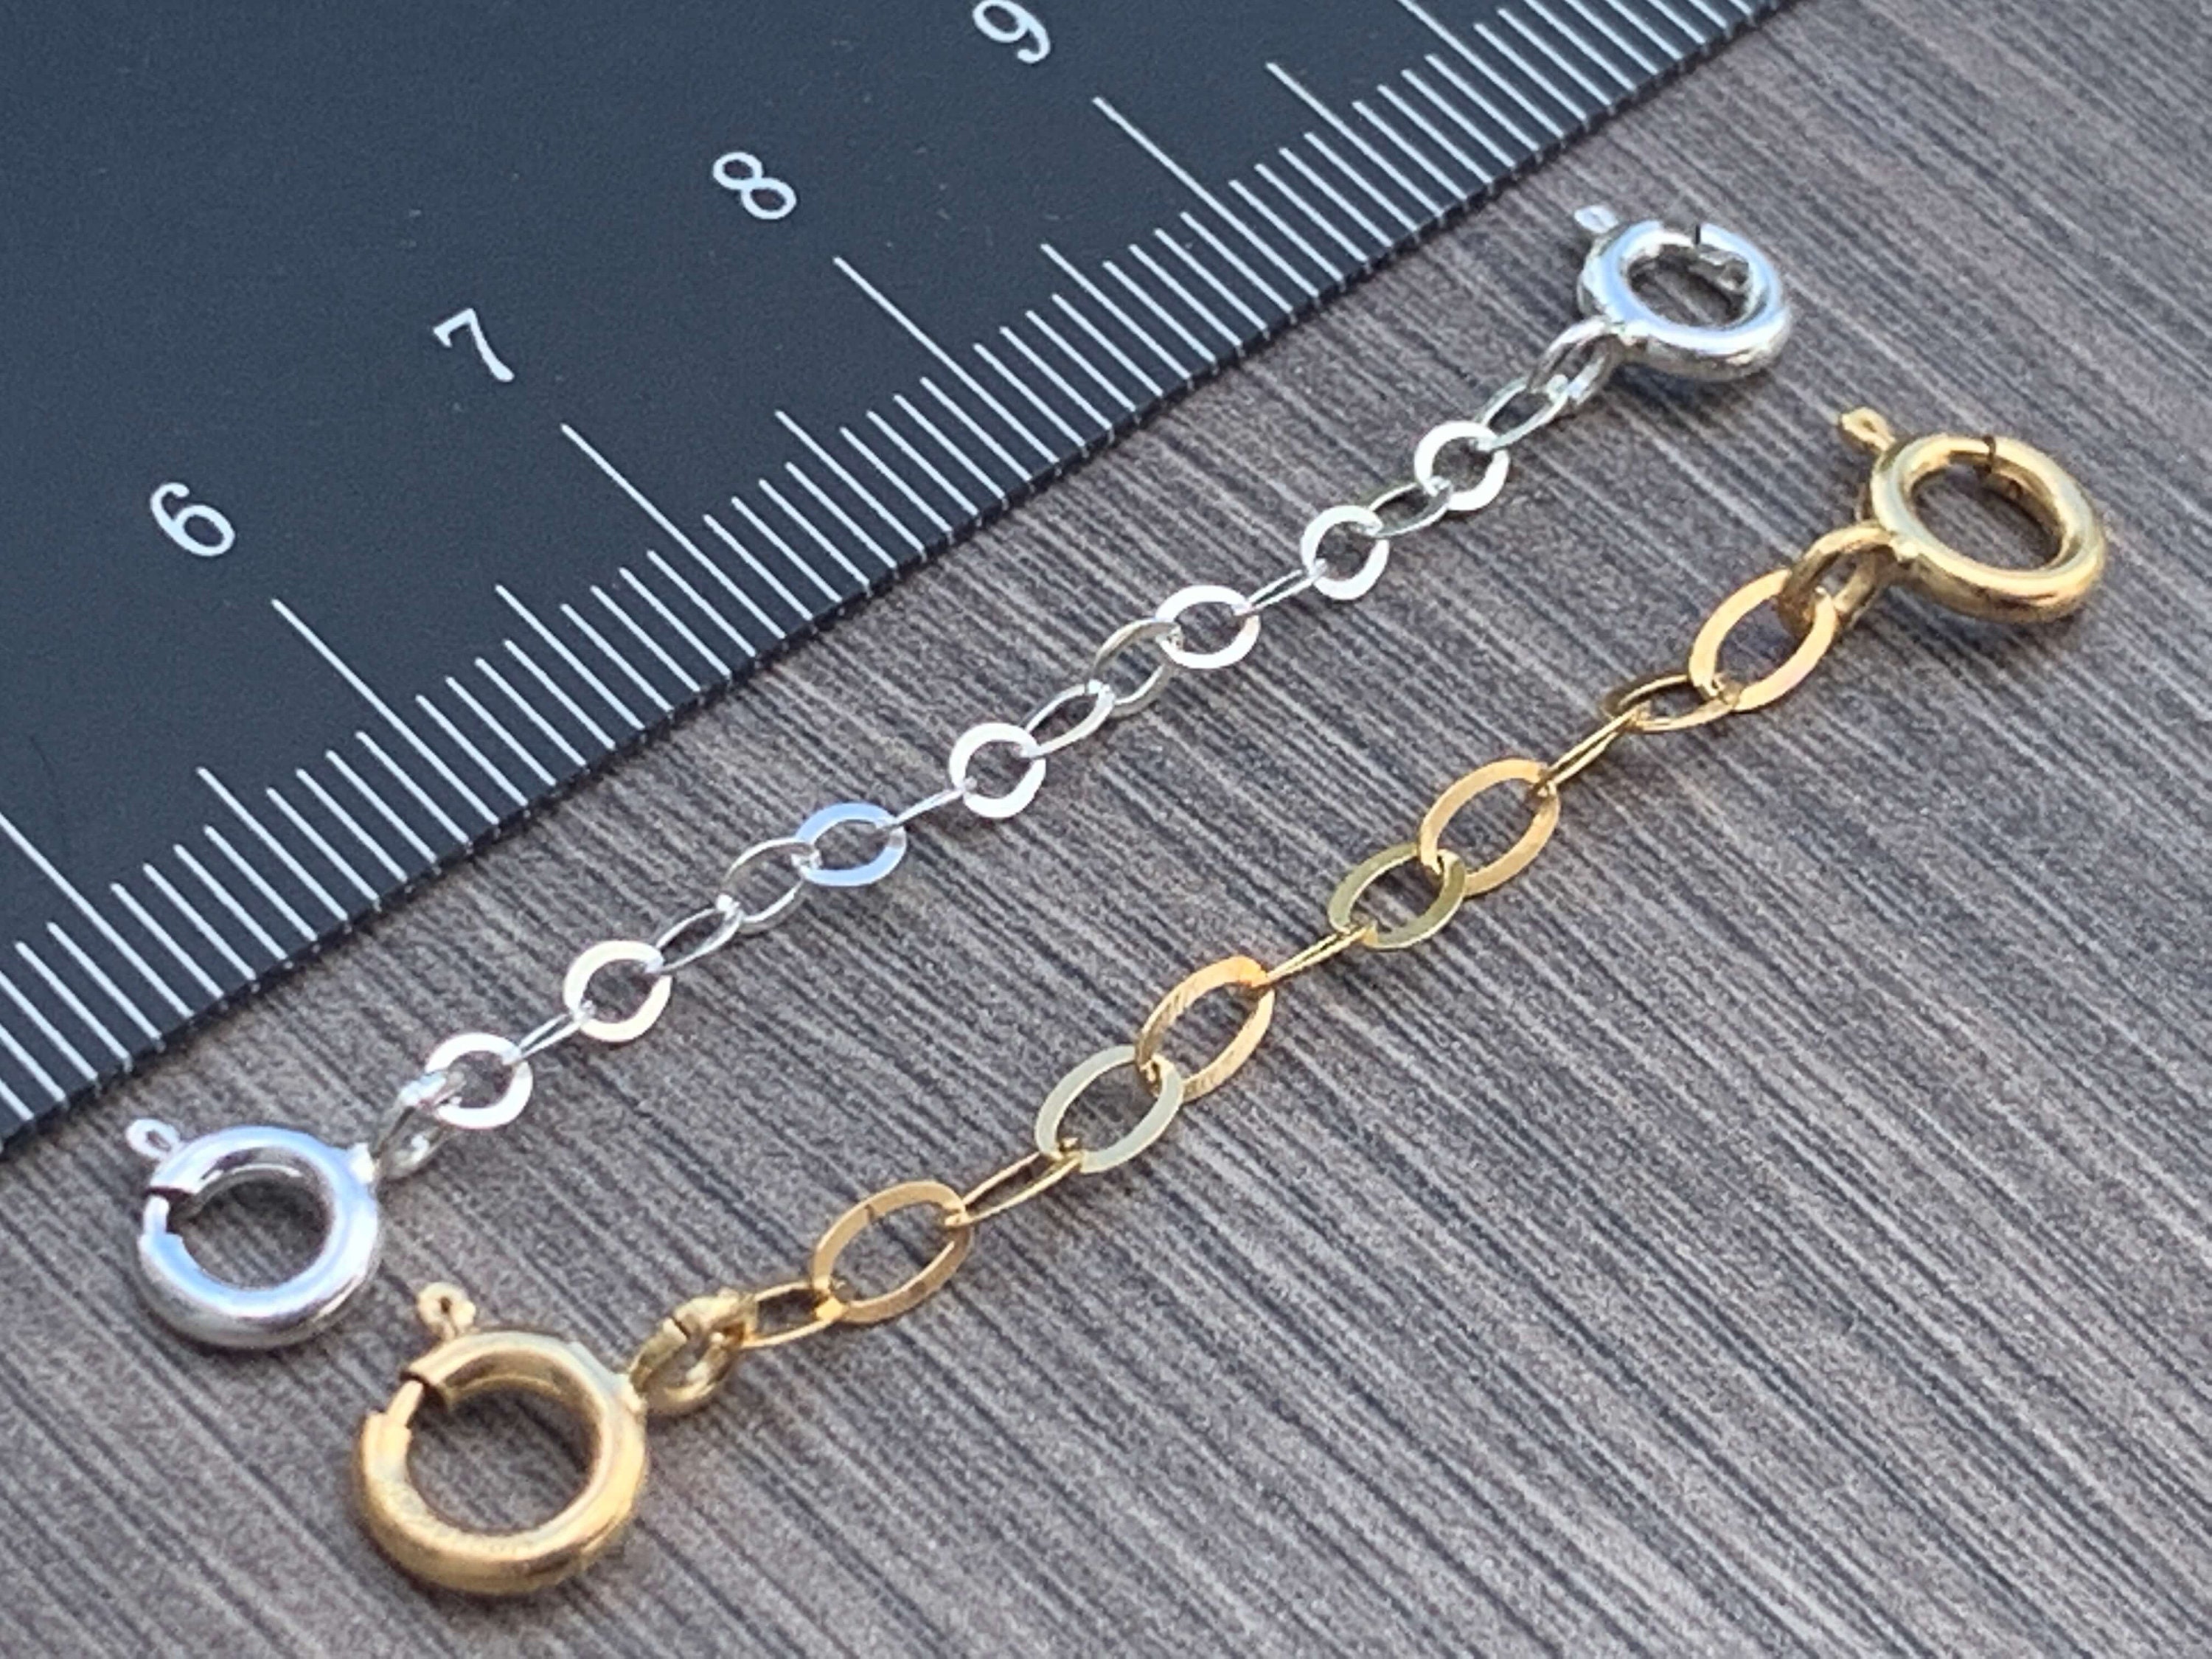  3pcs Jewelry Accessories Chain Extenders Necklaces Jewels Charm  Gold Chain Extender Jewelry Extenders Gold Necklace Extension Chain DIY  Chain Bracelet Push and Pull : Arts, Crafts & Sewing